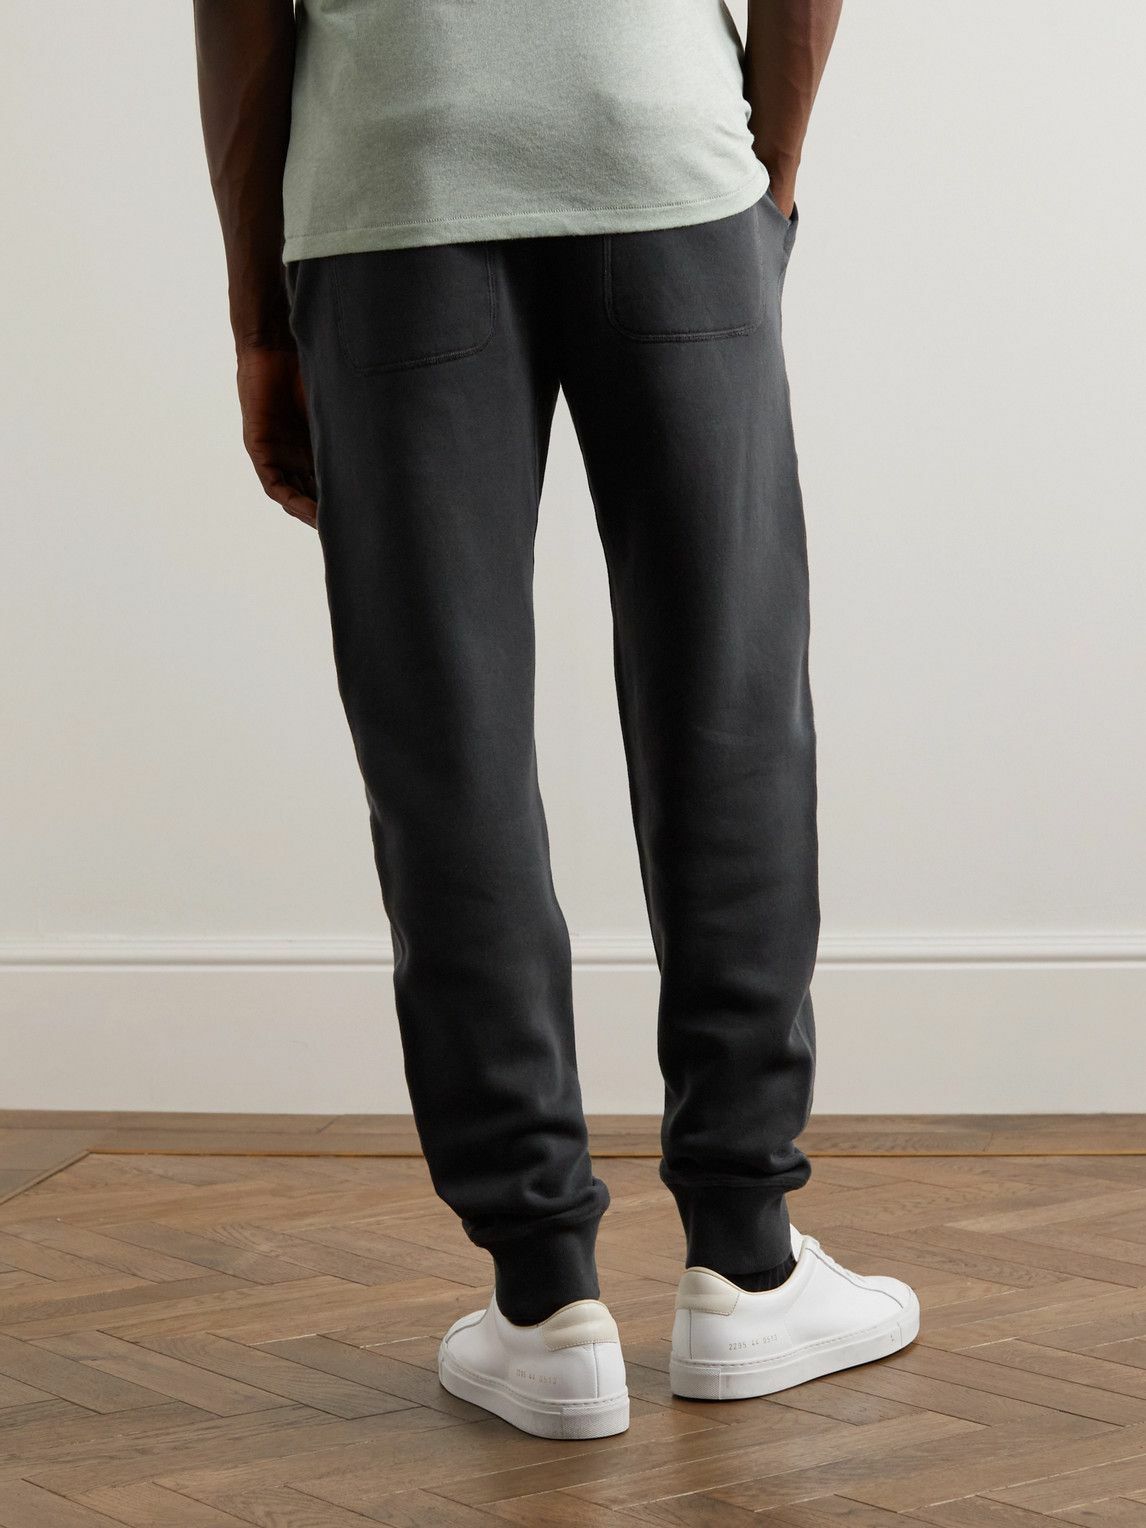 TOM FORD - Tapered Garment-Dyed Cotton-Jersey Sweatpants - Black TOM FORD